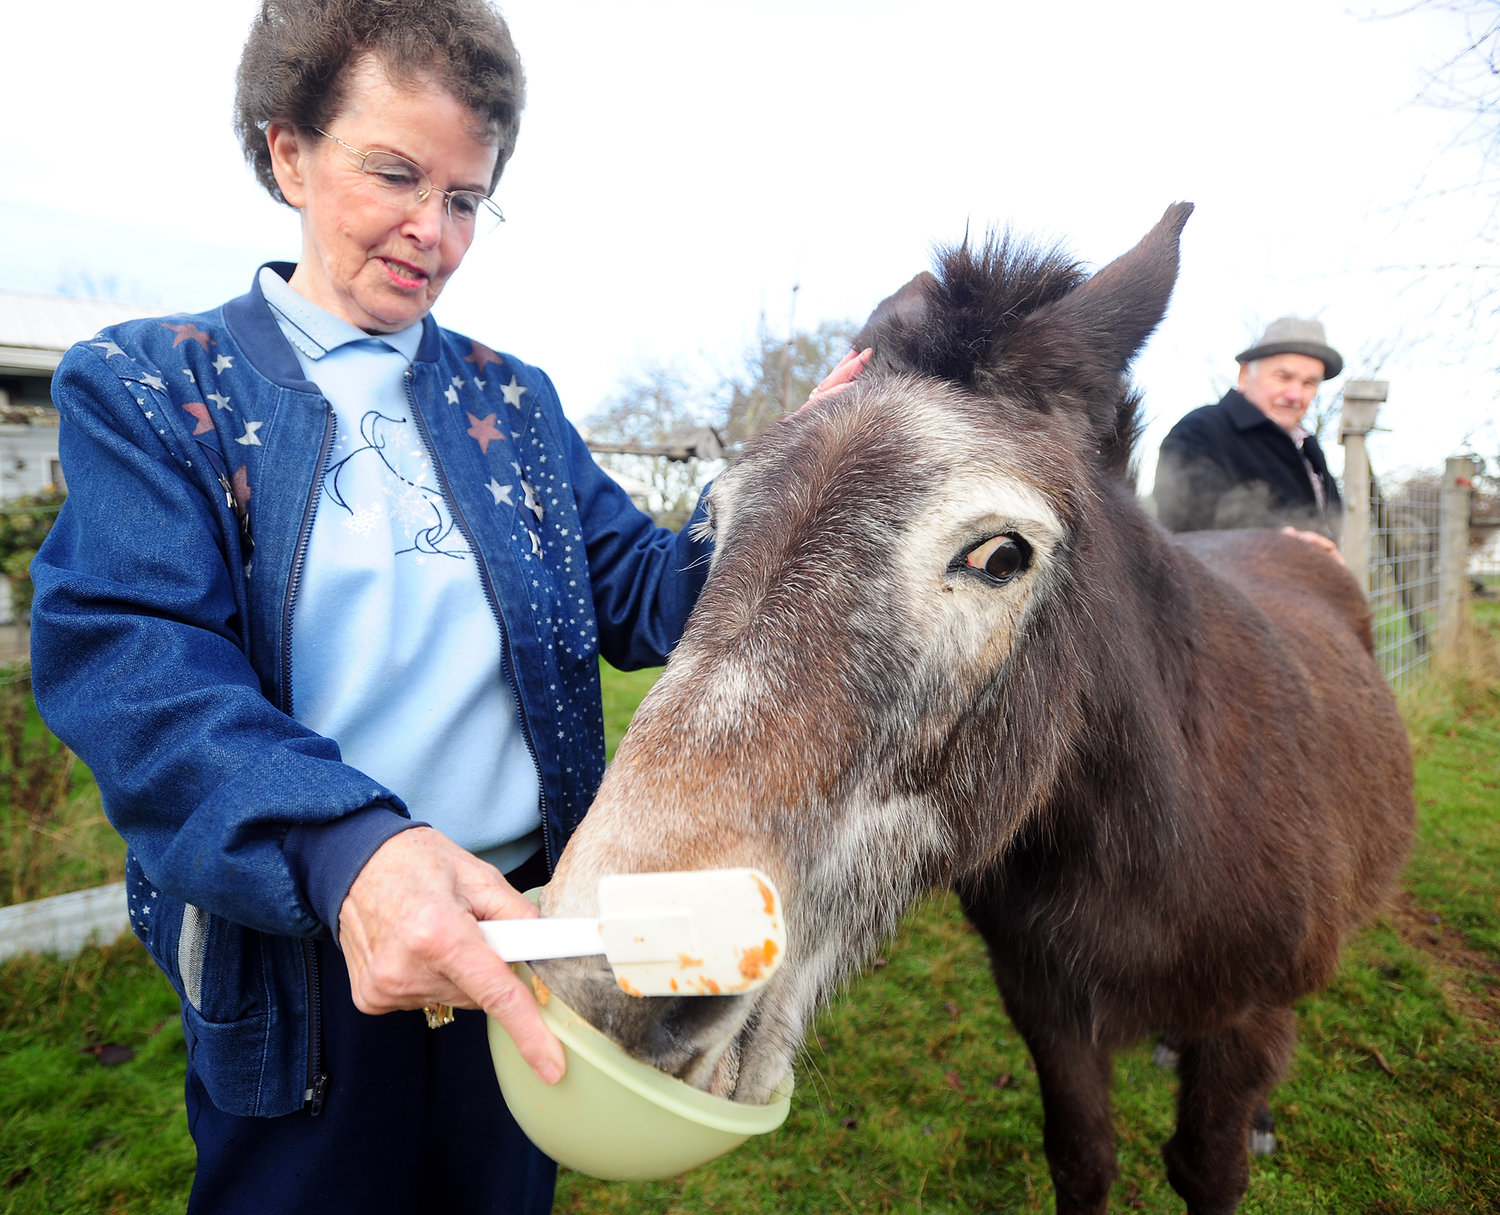 Bummy Yantis and her husband, Herb, feed their 50-year-old mule, Ted, at their home in Adna on Tuesday morning.